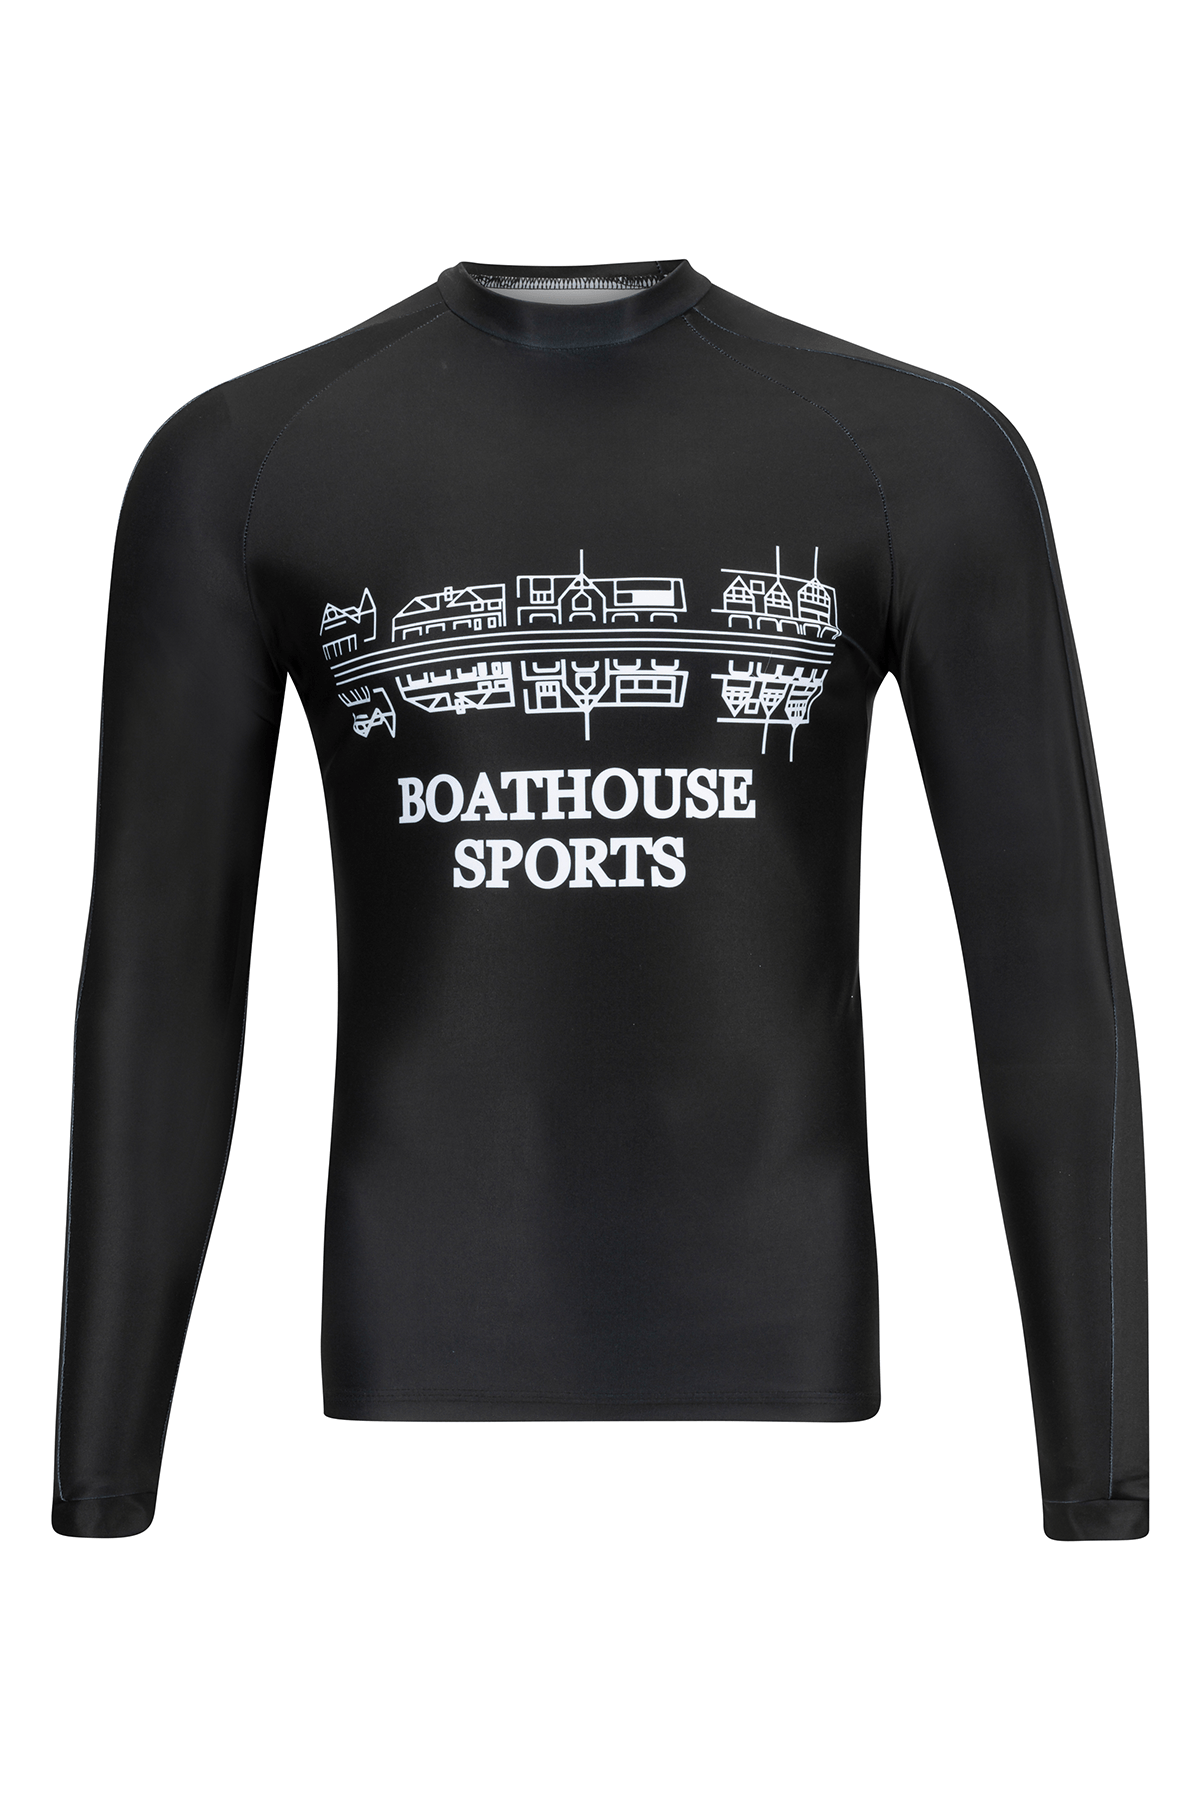 Men's Signature Boathouse Row Long Sleeve Compression Top Black / Small